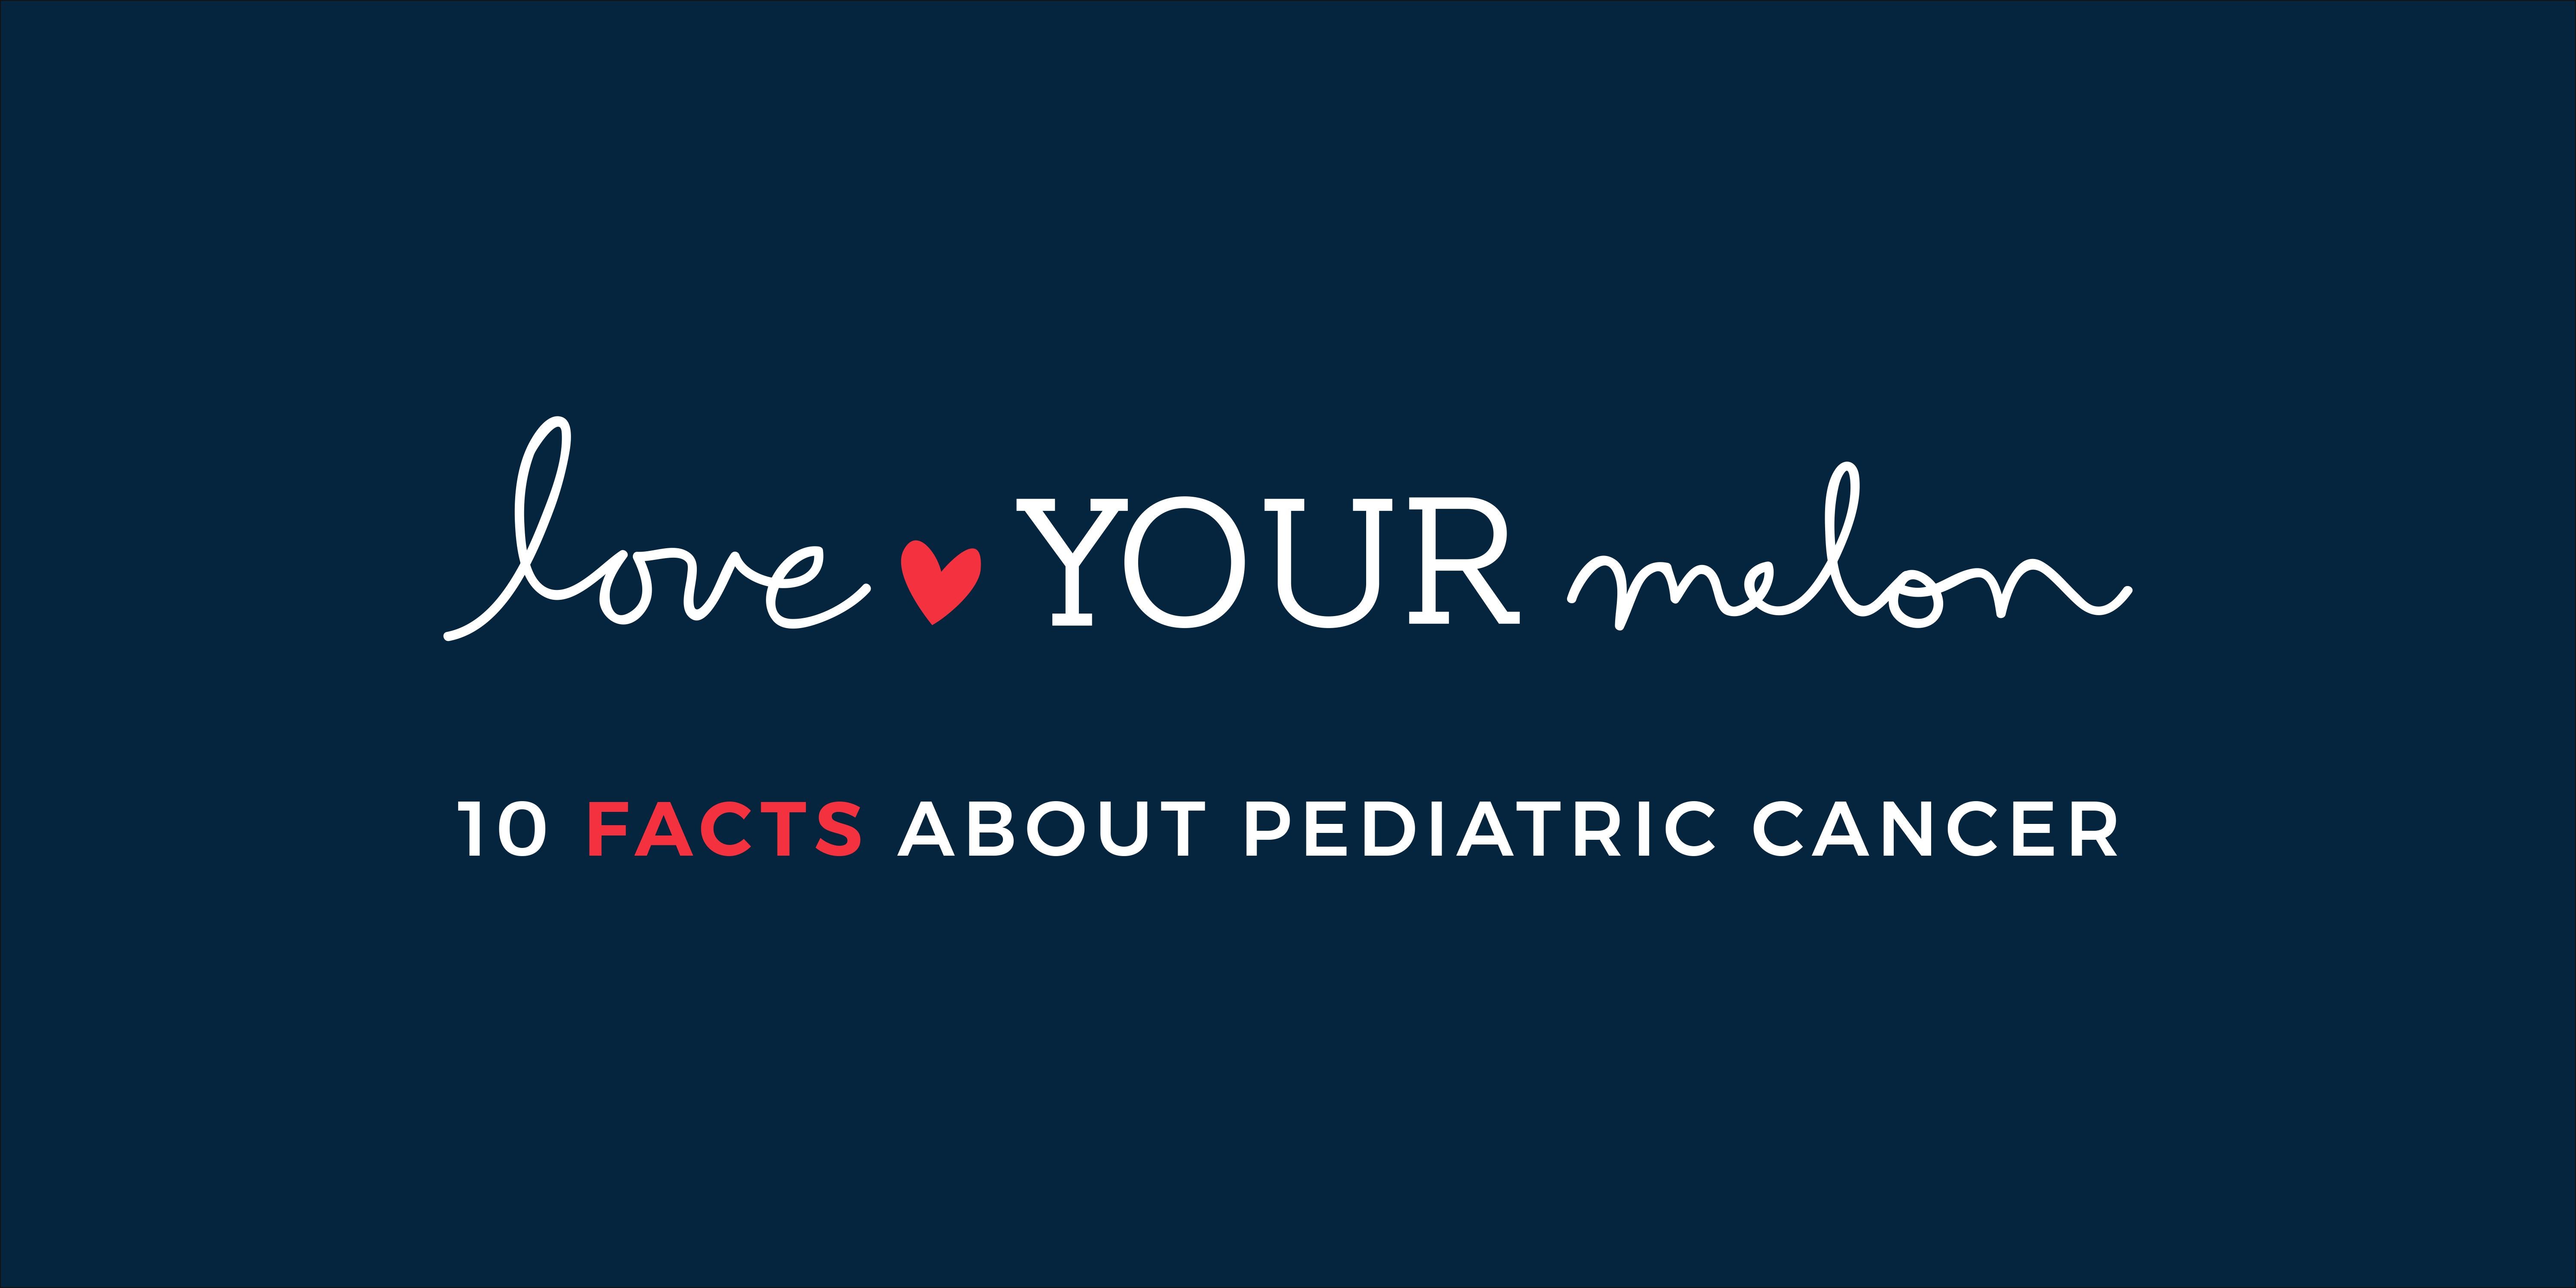 10 Facts You Should Know About Pediatric Cancer